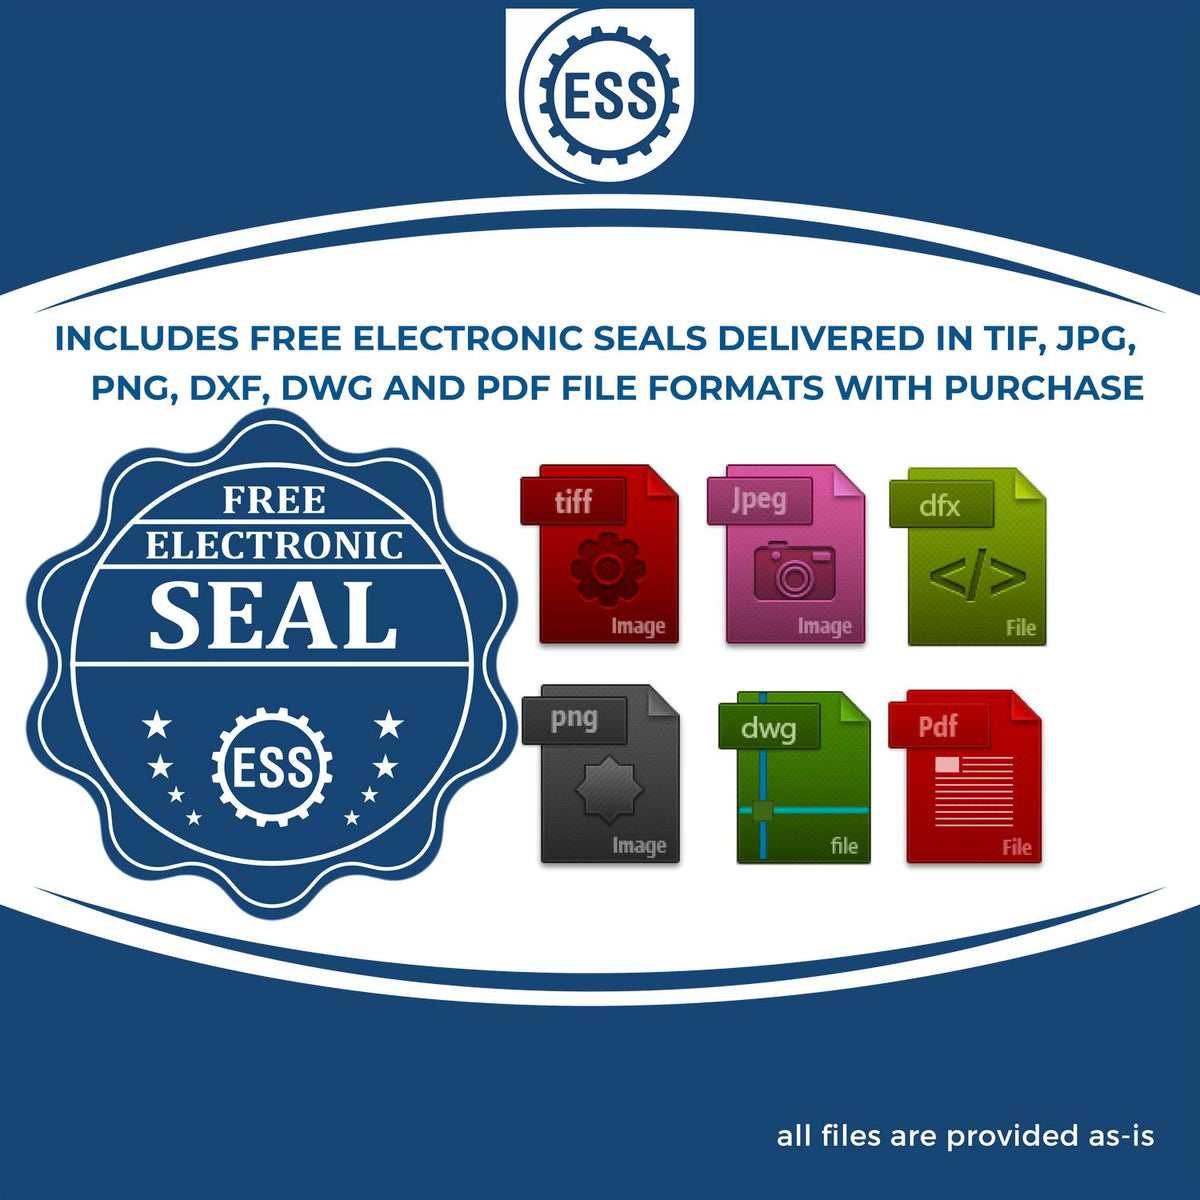 An infographic for the free electronic seal for the Gift Washington Architect Seal illustrating the different file type icons such as DXF, DWG, TIF, JPG and PNG.